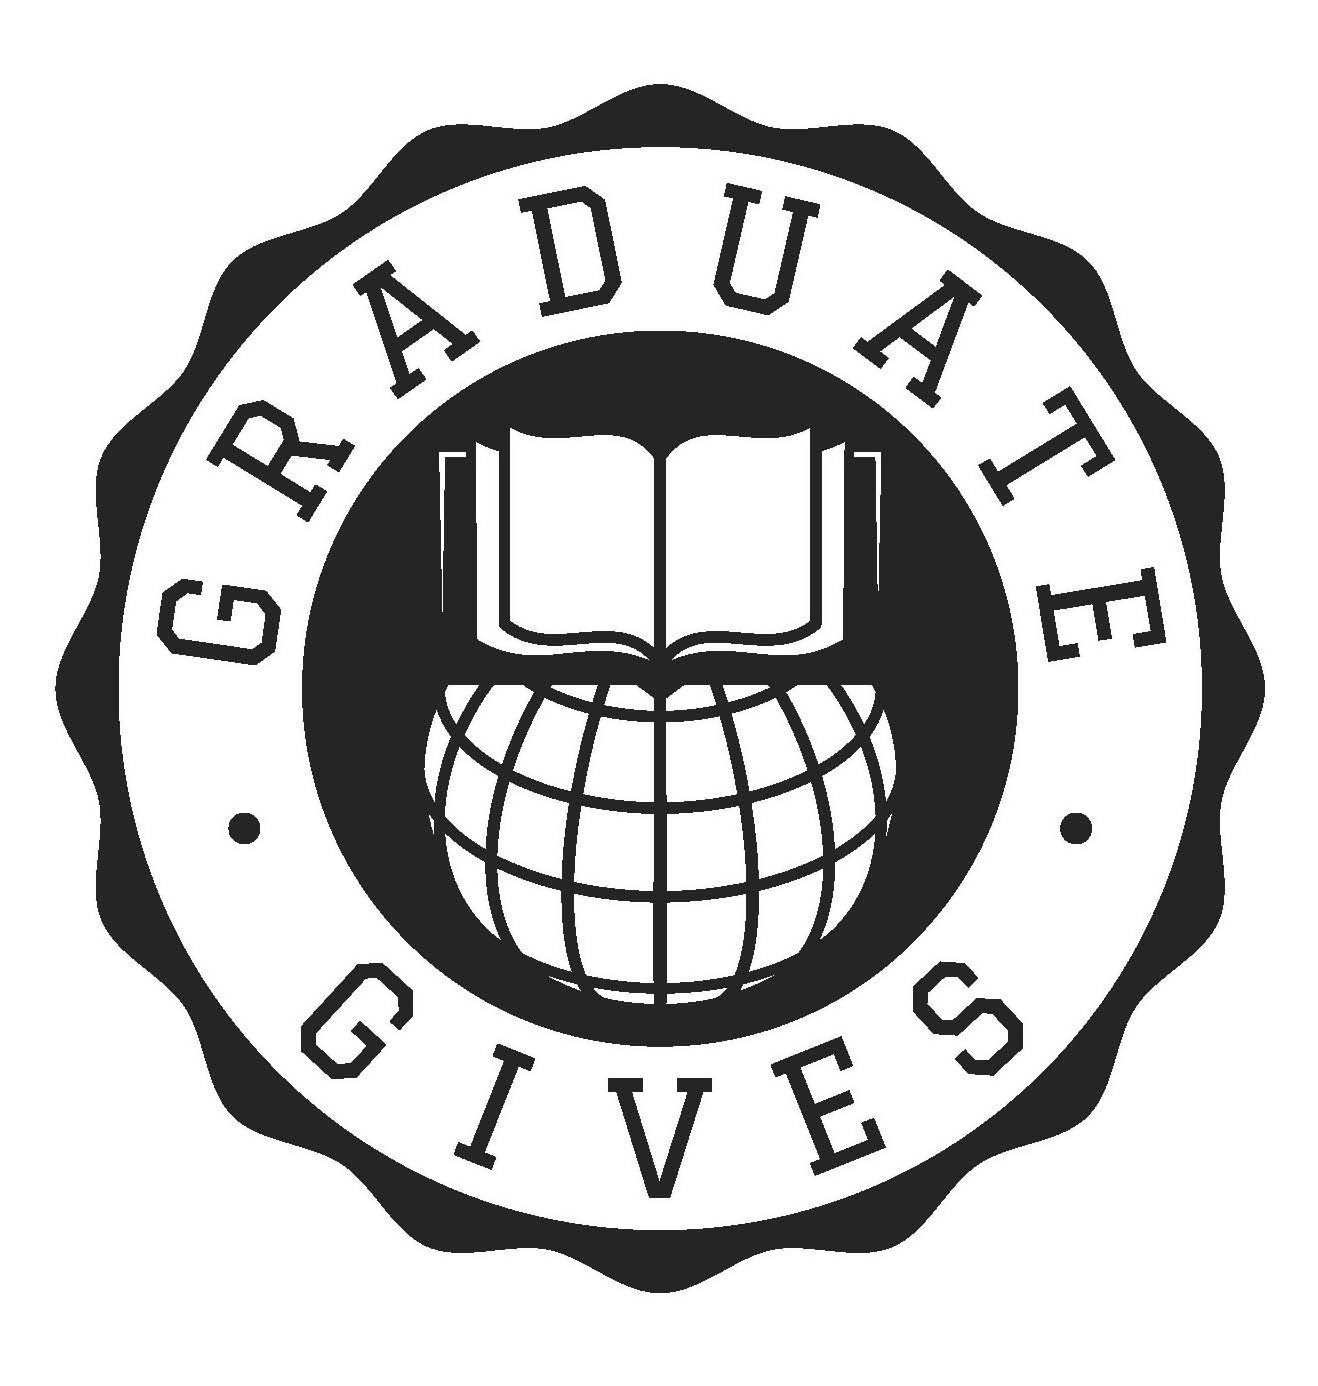  GRADUATE GIVES